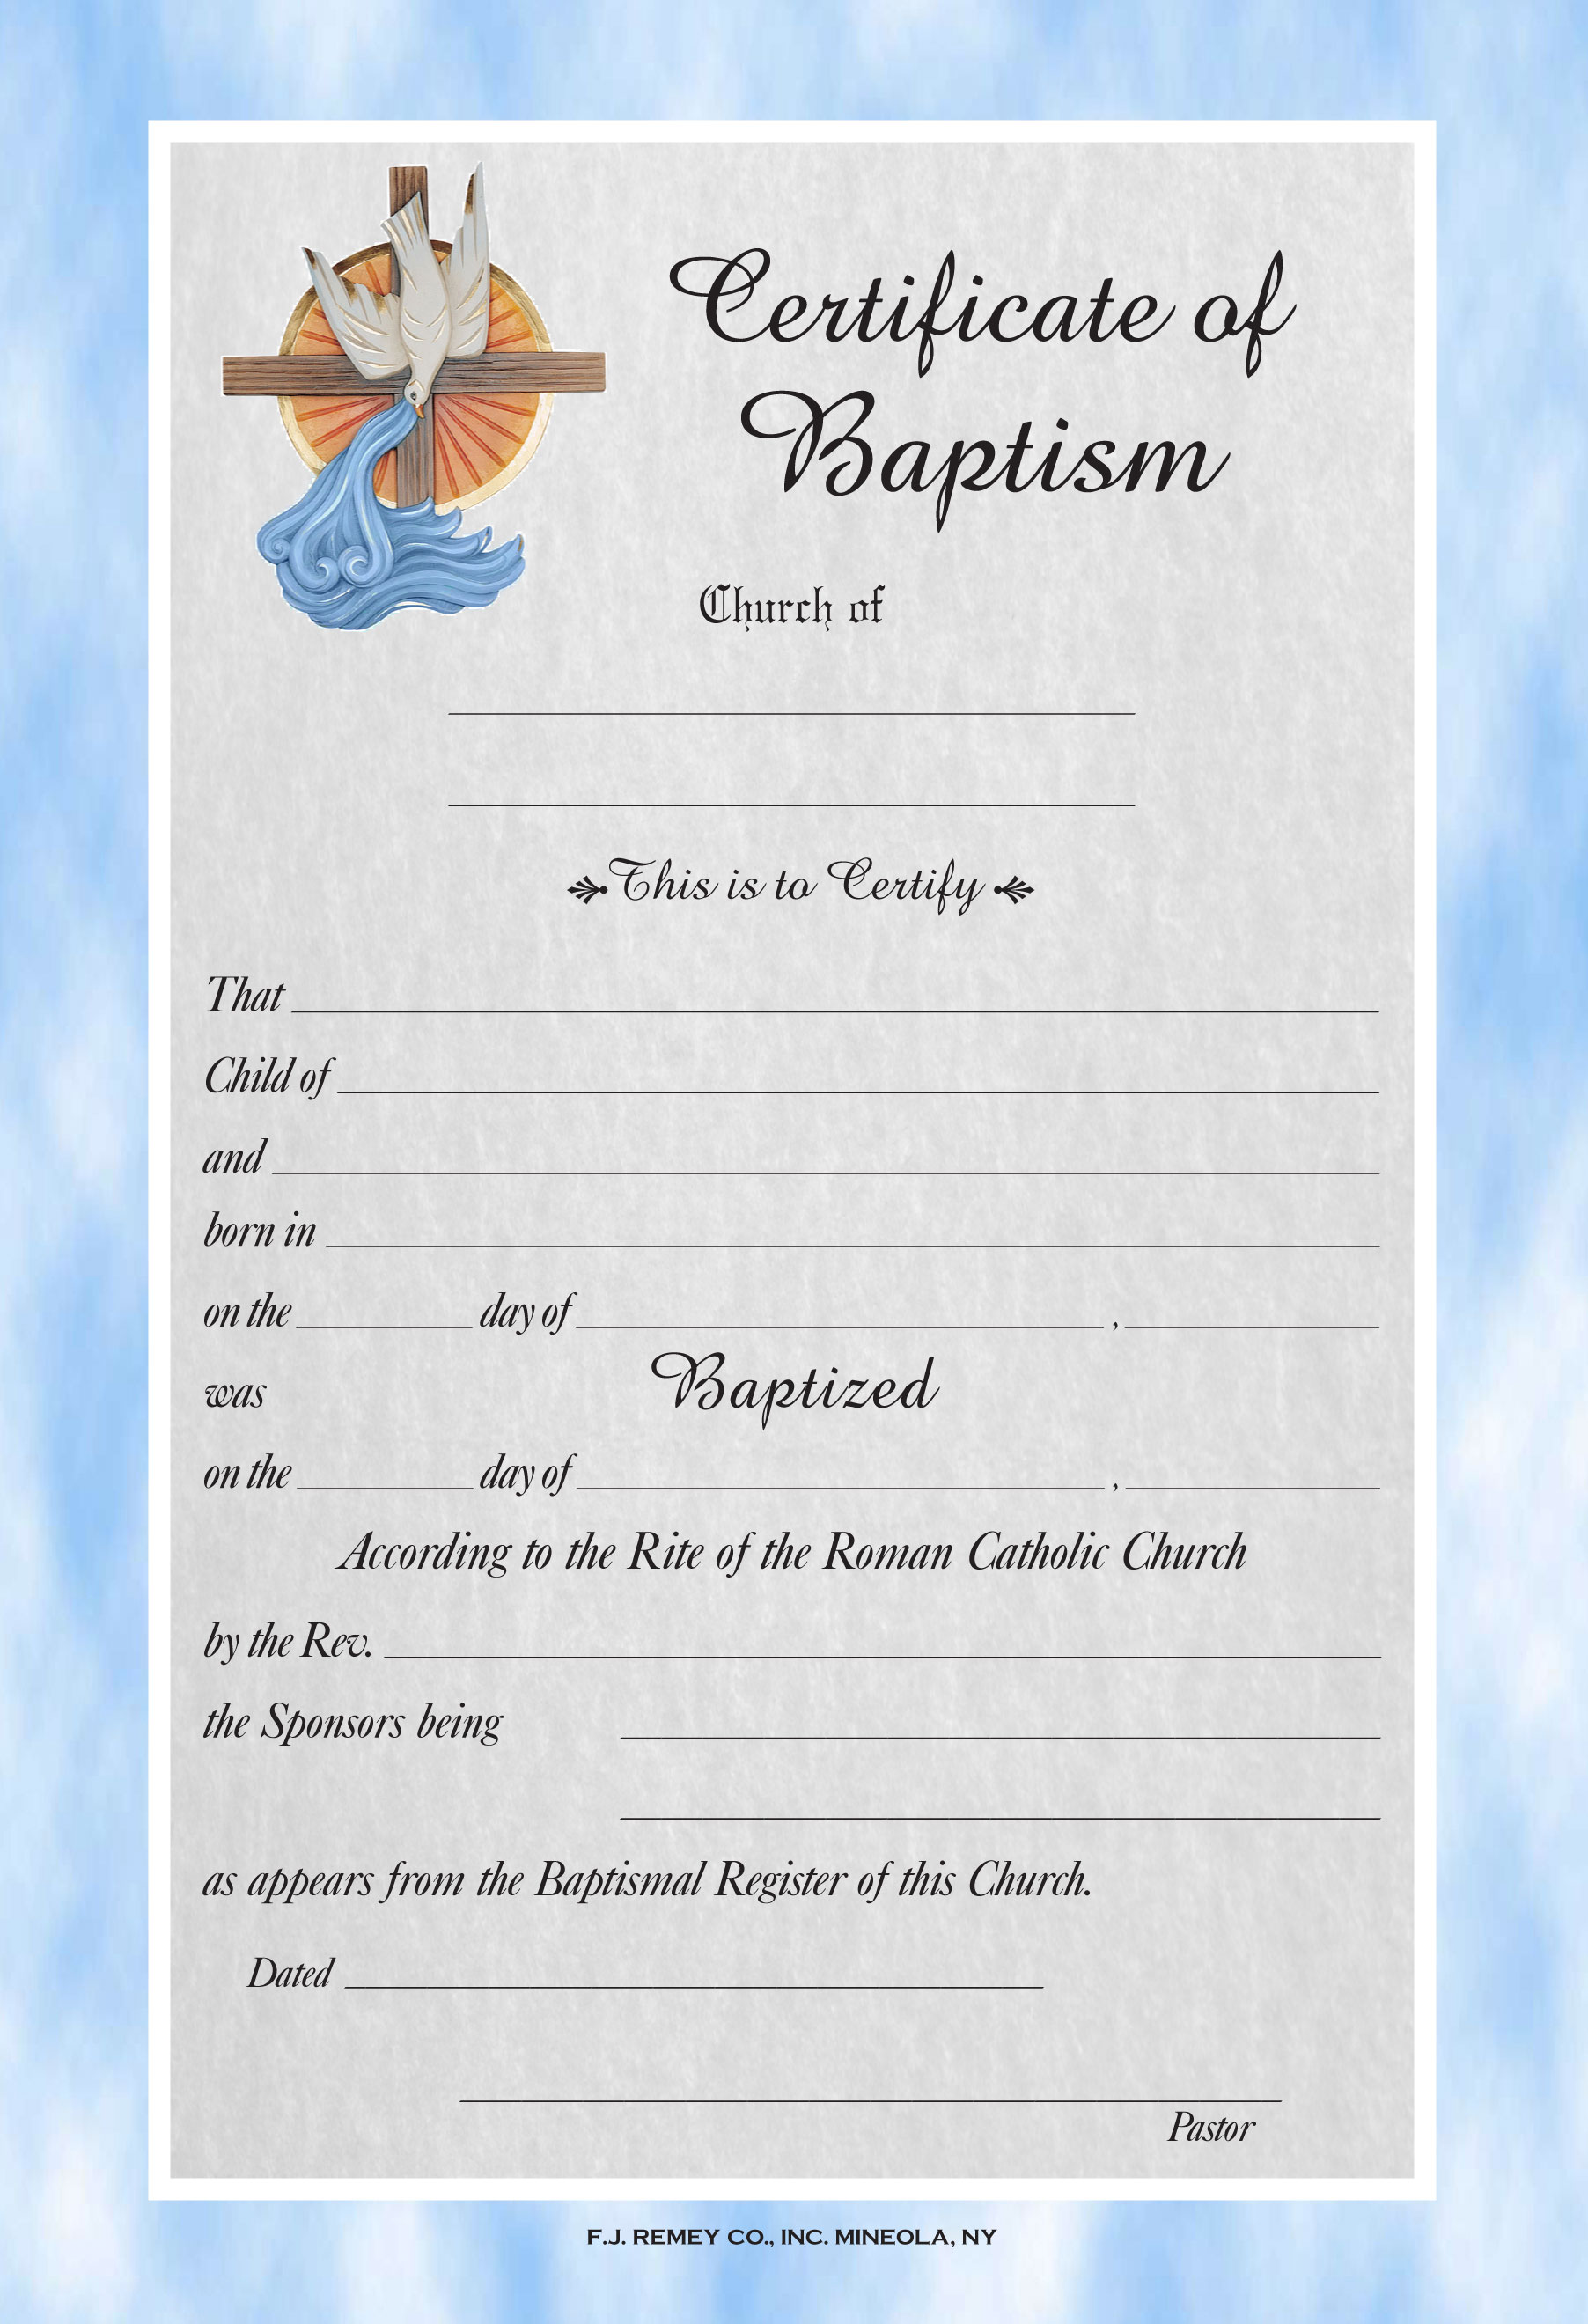 Baptismal Certificate With Notations In Roman Catholic Baptism Certificate Template